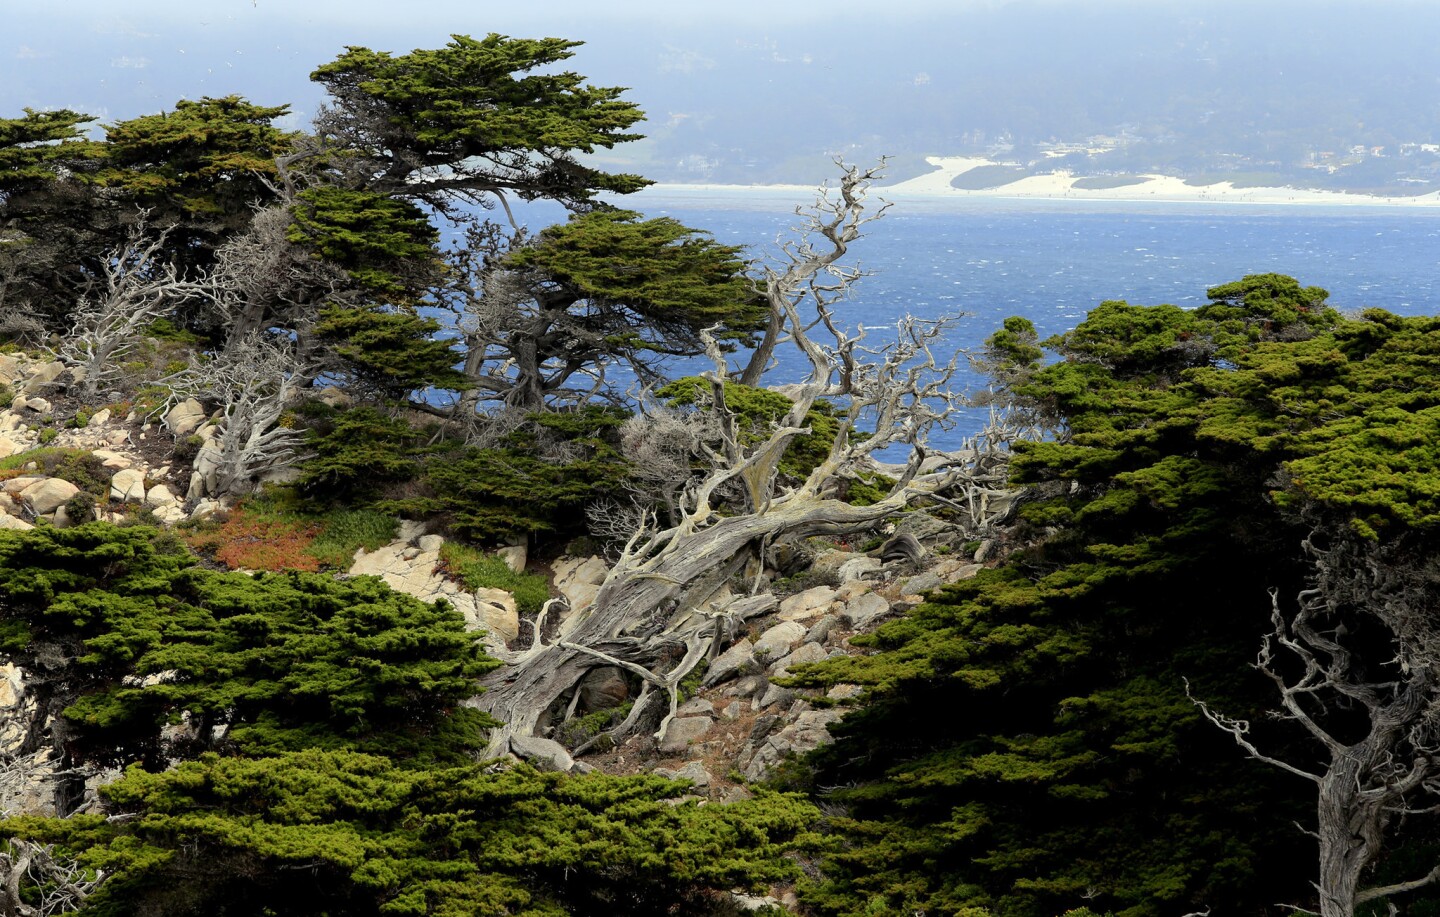 Groves of Monterey Cypress cover the rocky shoreline at Point Lobos State Reserve, three miles south of Carmel. Admission to the reserve is $10 a car. Many visitors dodge that cost by parking along Highway 1 and walking in.